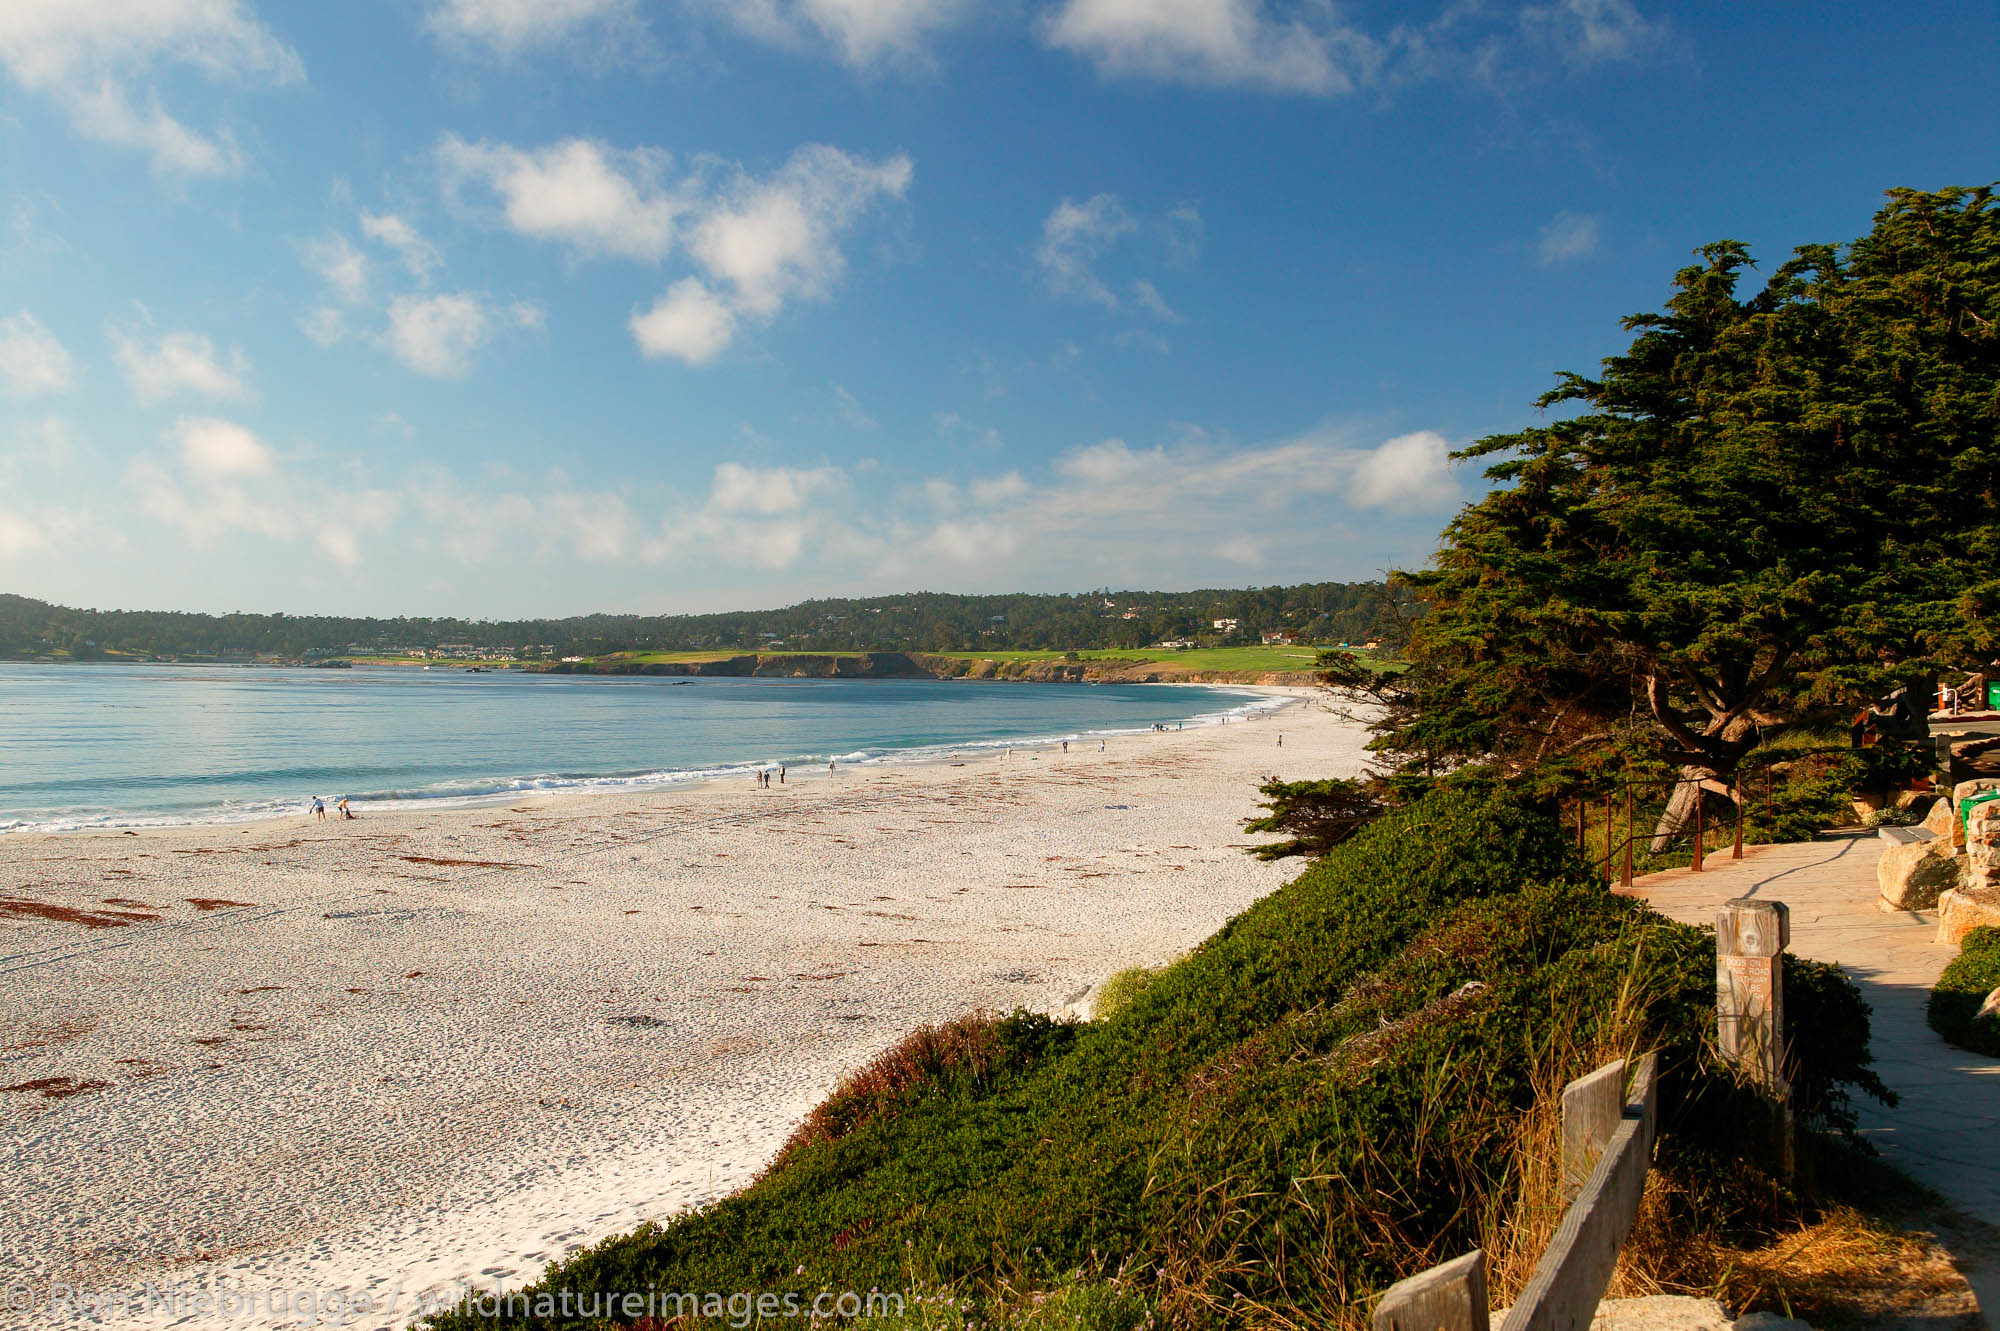 The beach and bay at Carmel By The Sea, California.